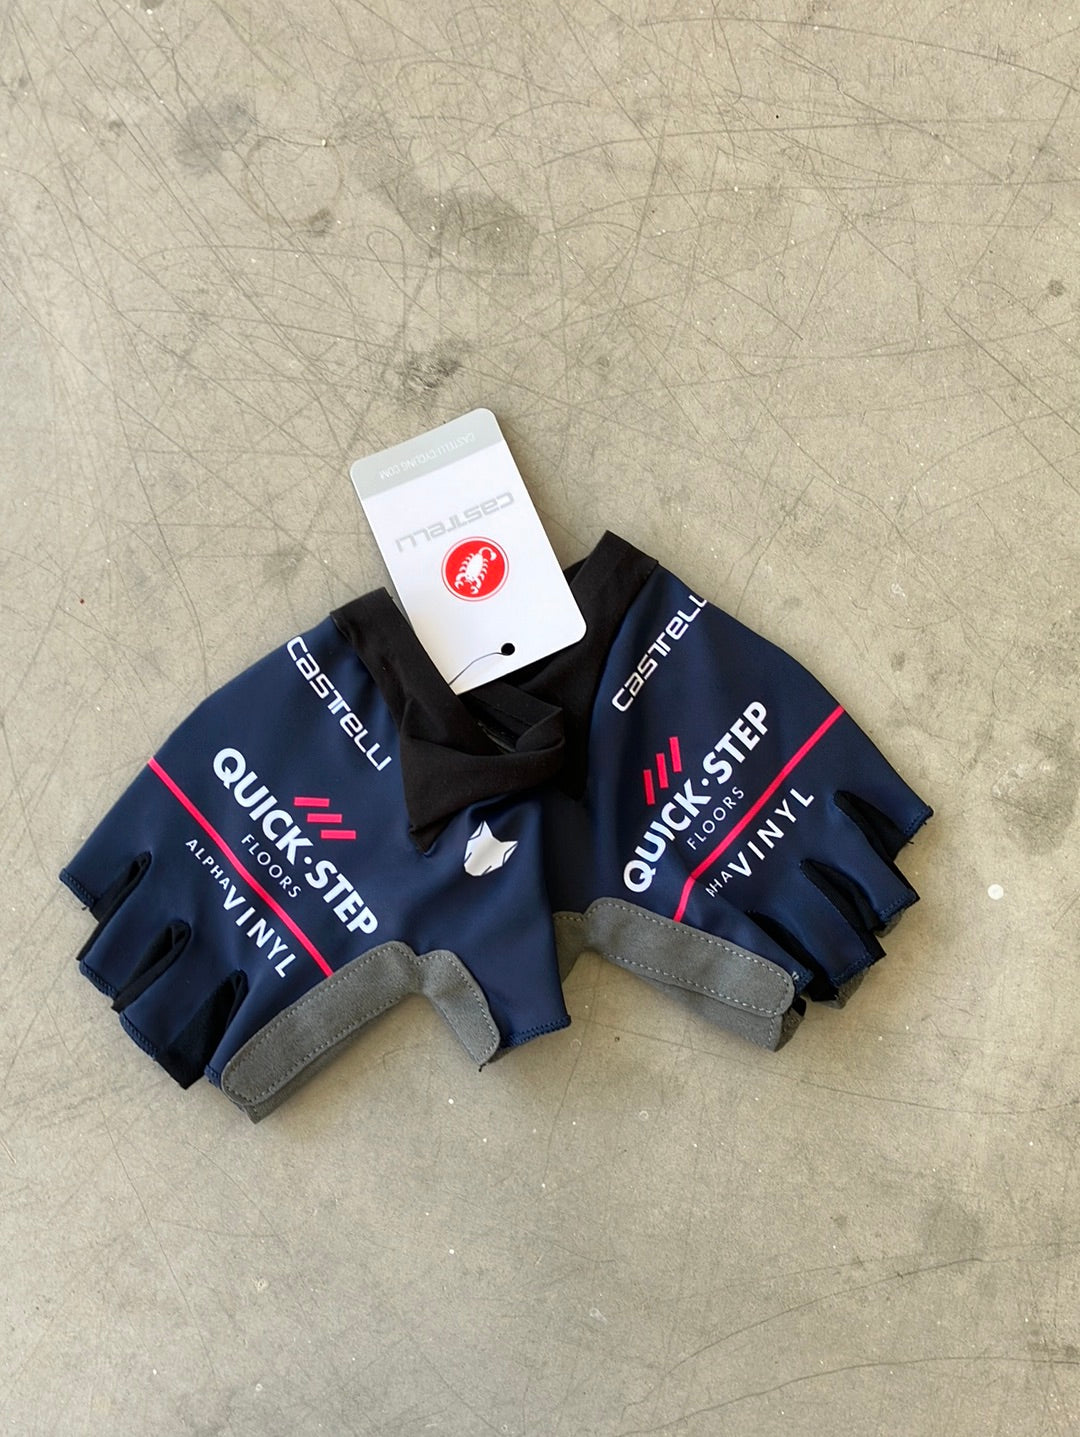 Gloves Mitts team Issued Competizione2 | Castelli | Blue | Quick-Step Alpha Vinyl / Soudal  | Pro Cycling Kit